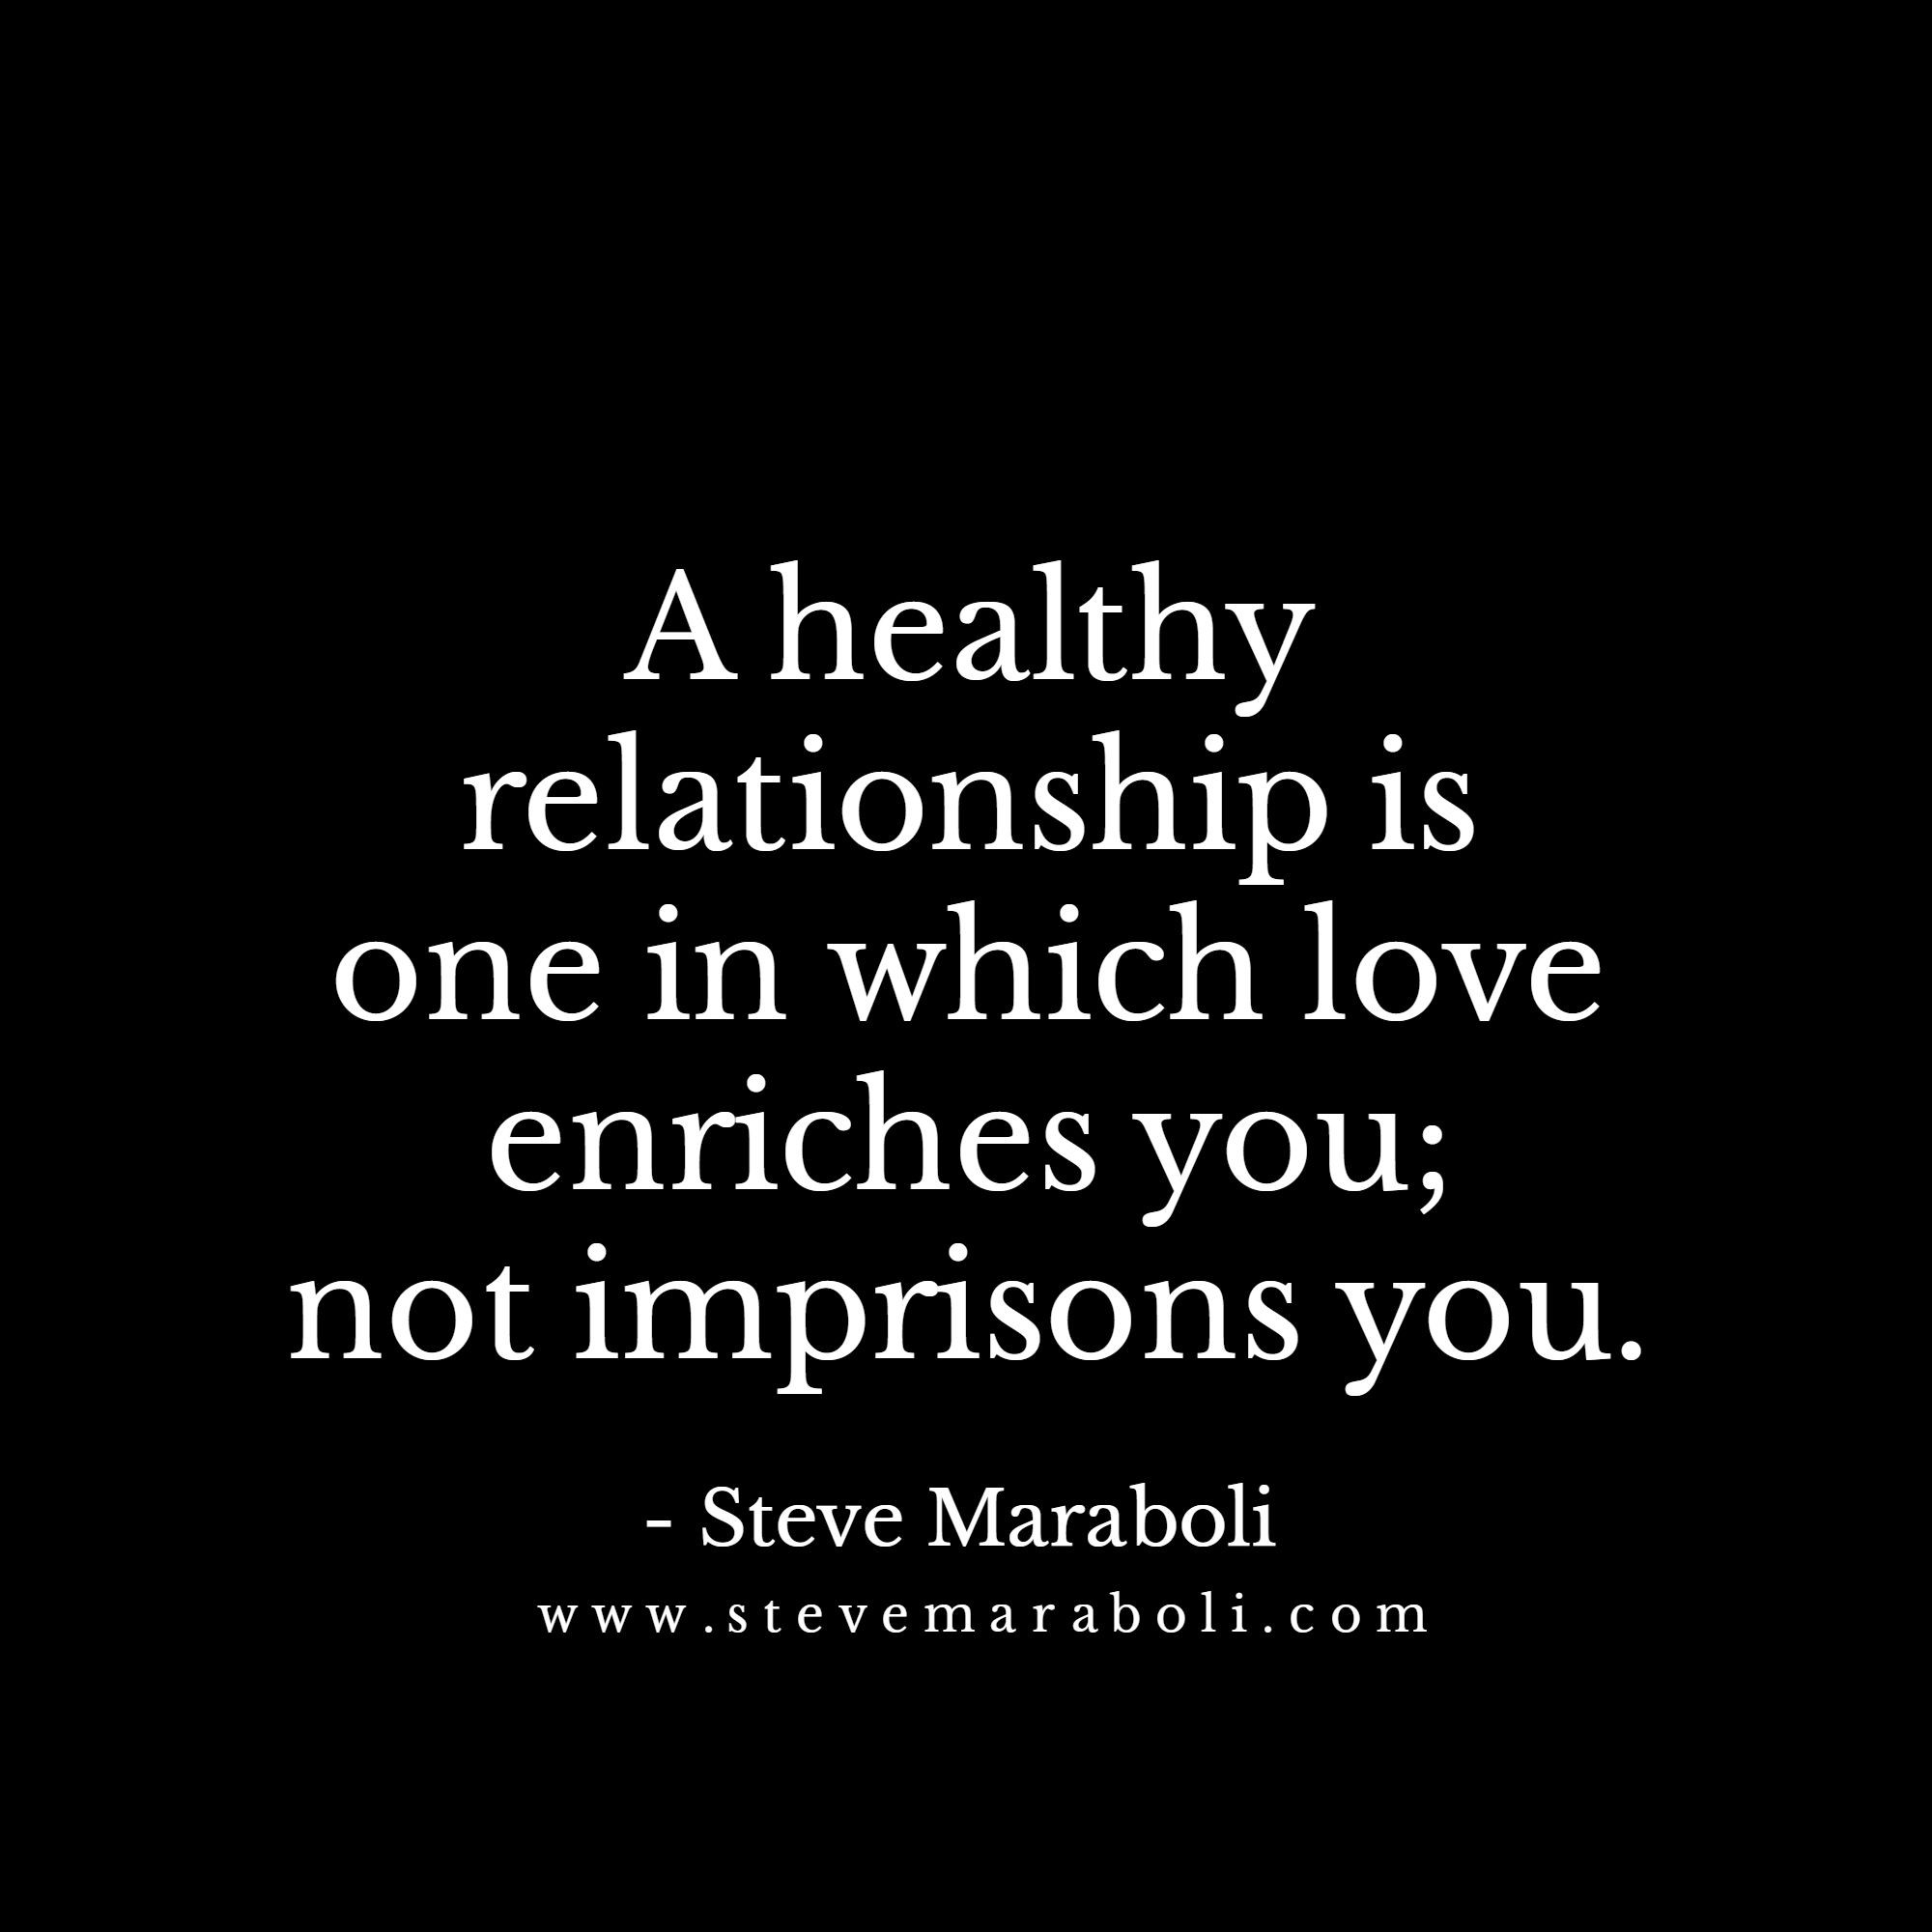 Quote About Healthy Relationships
 A healthy relationship is one in which love enriches you